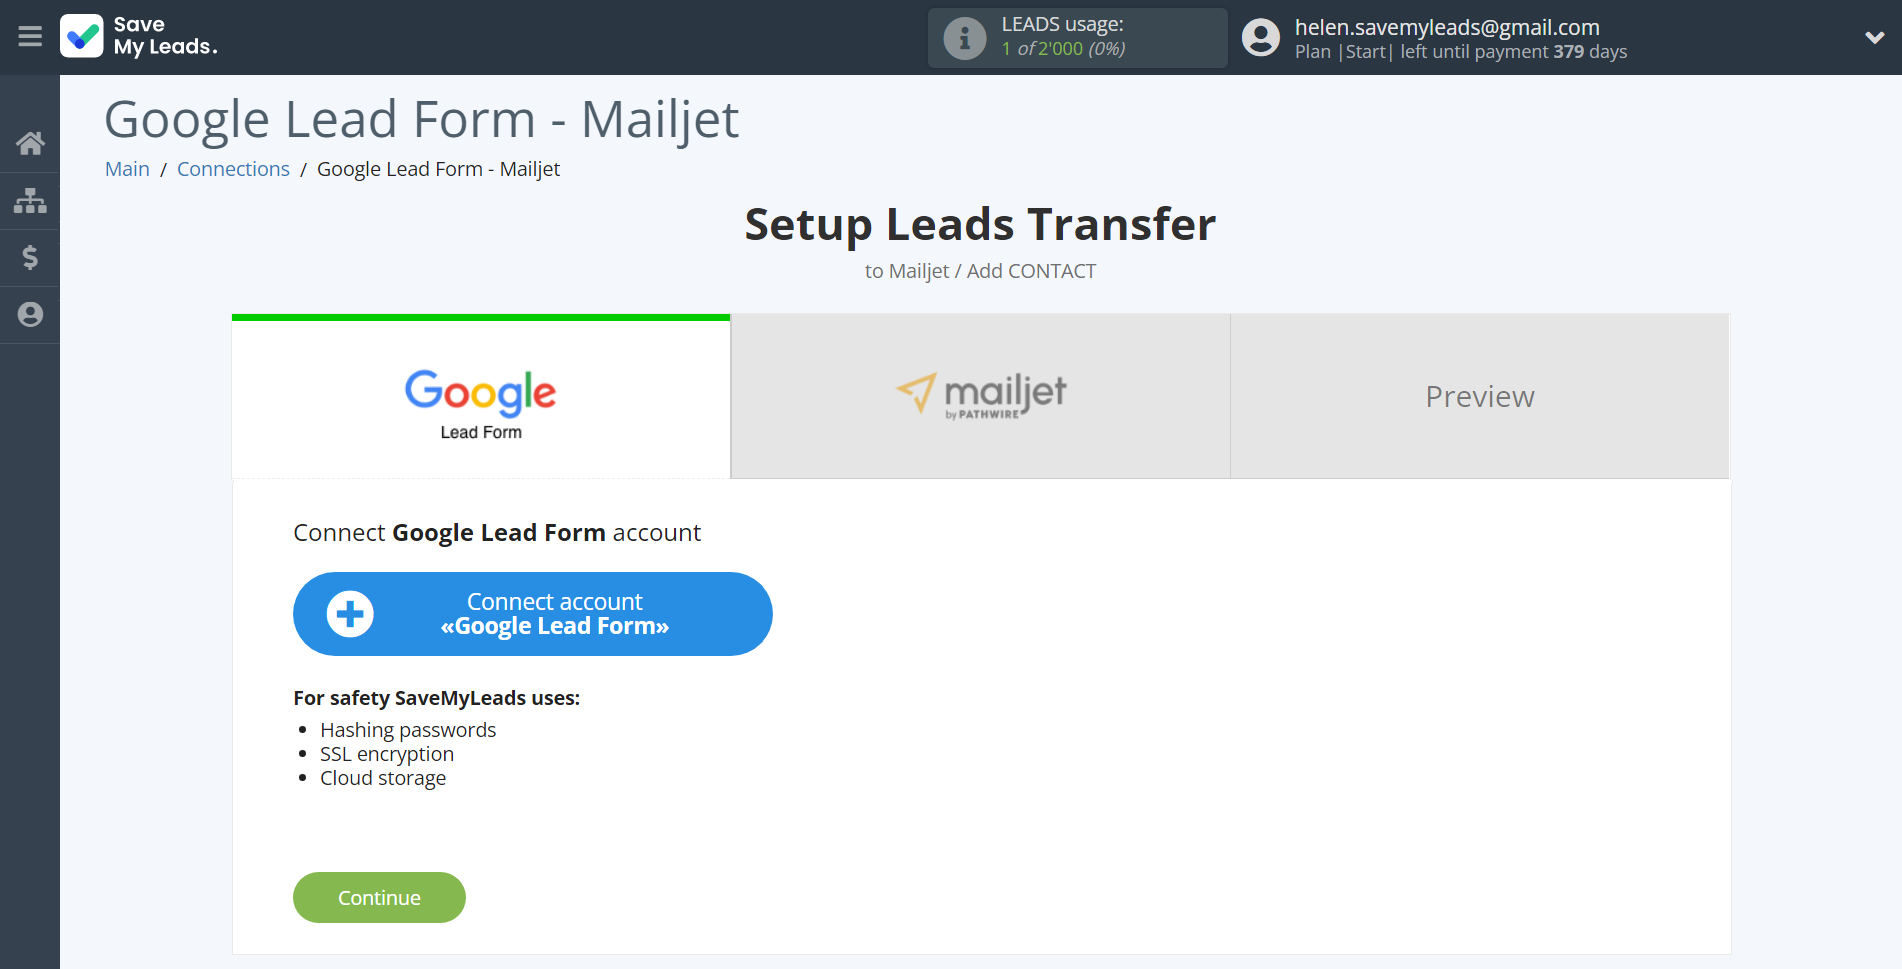 How to Connect Google Lead Form with Mailjet | Data Source account